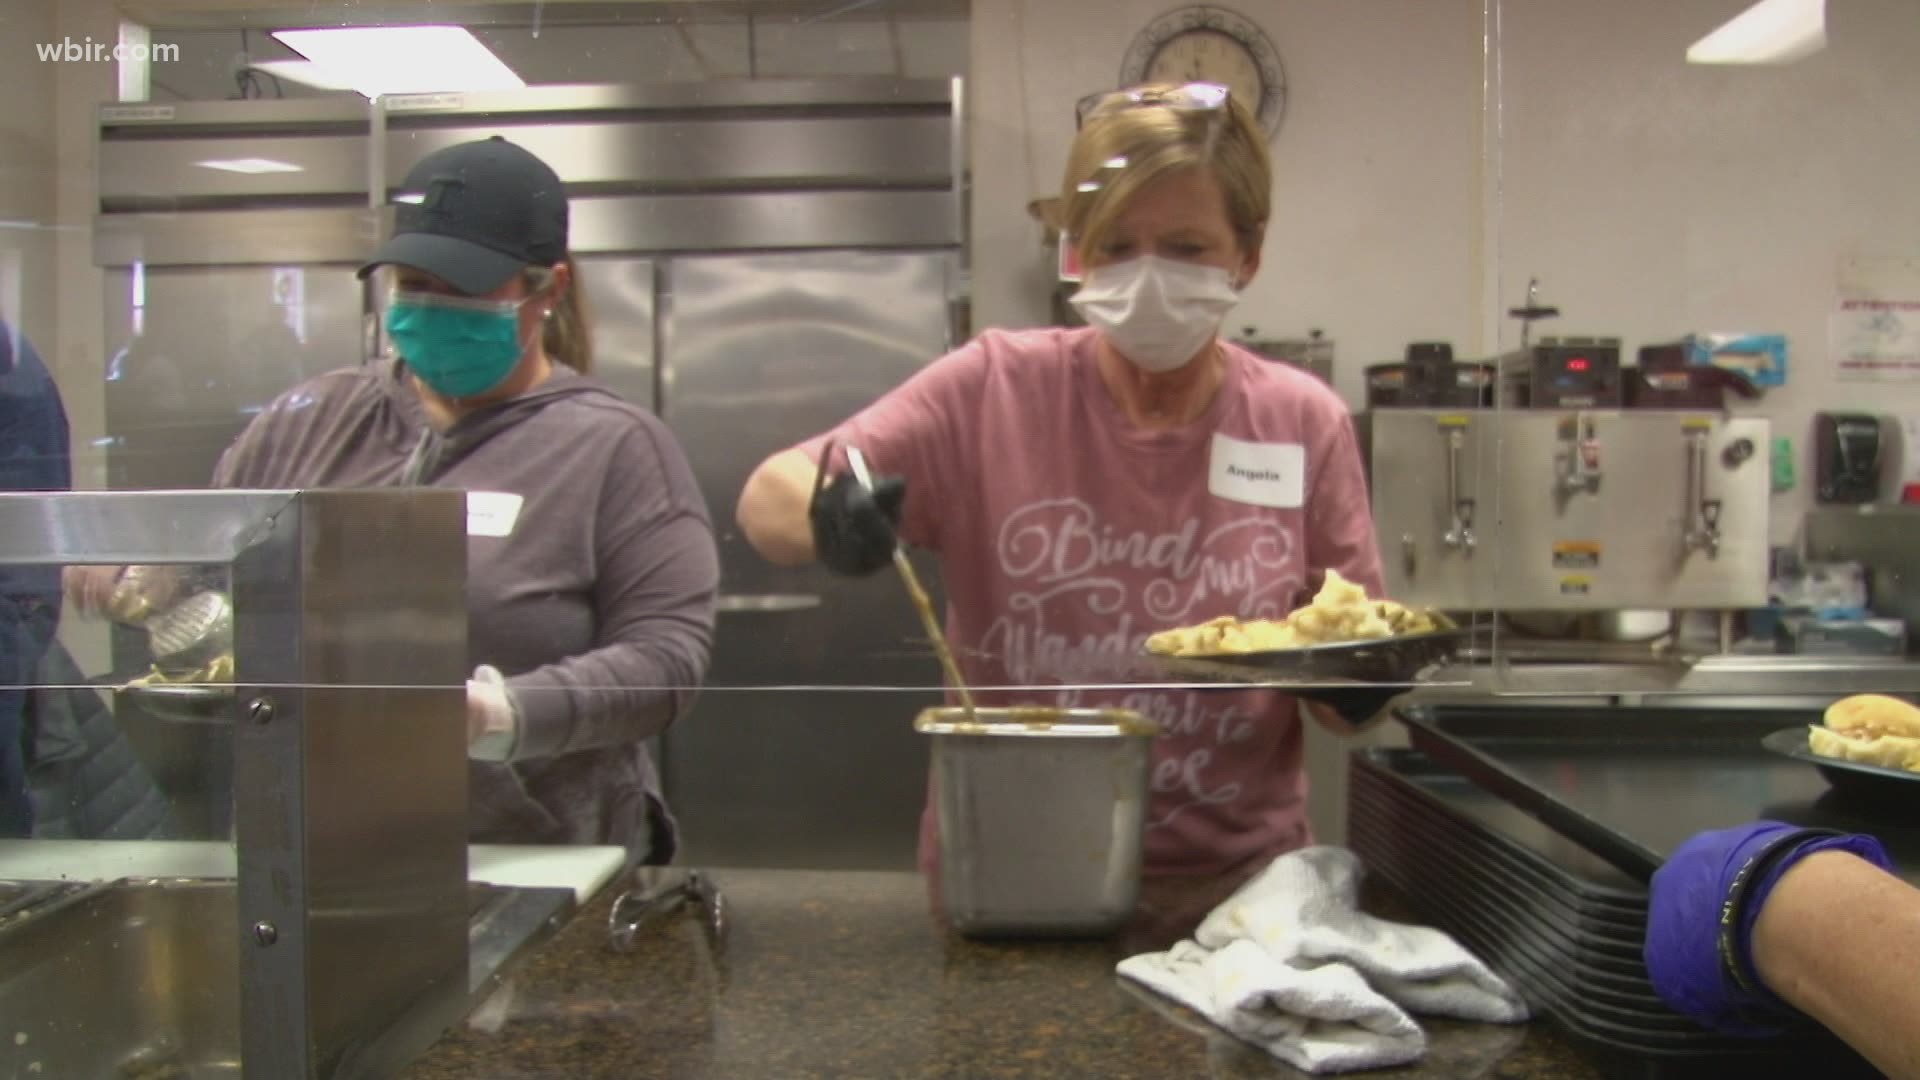 KARM kept up its tradition of feeding the homeless, with precautions this year due to the virus.